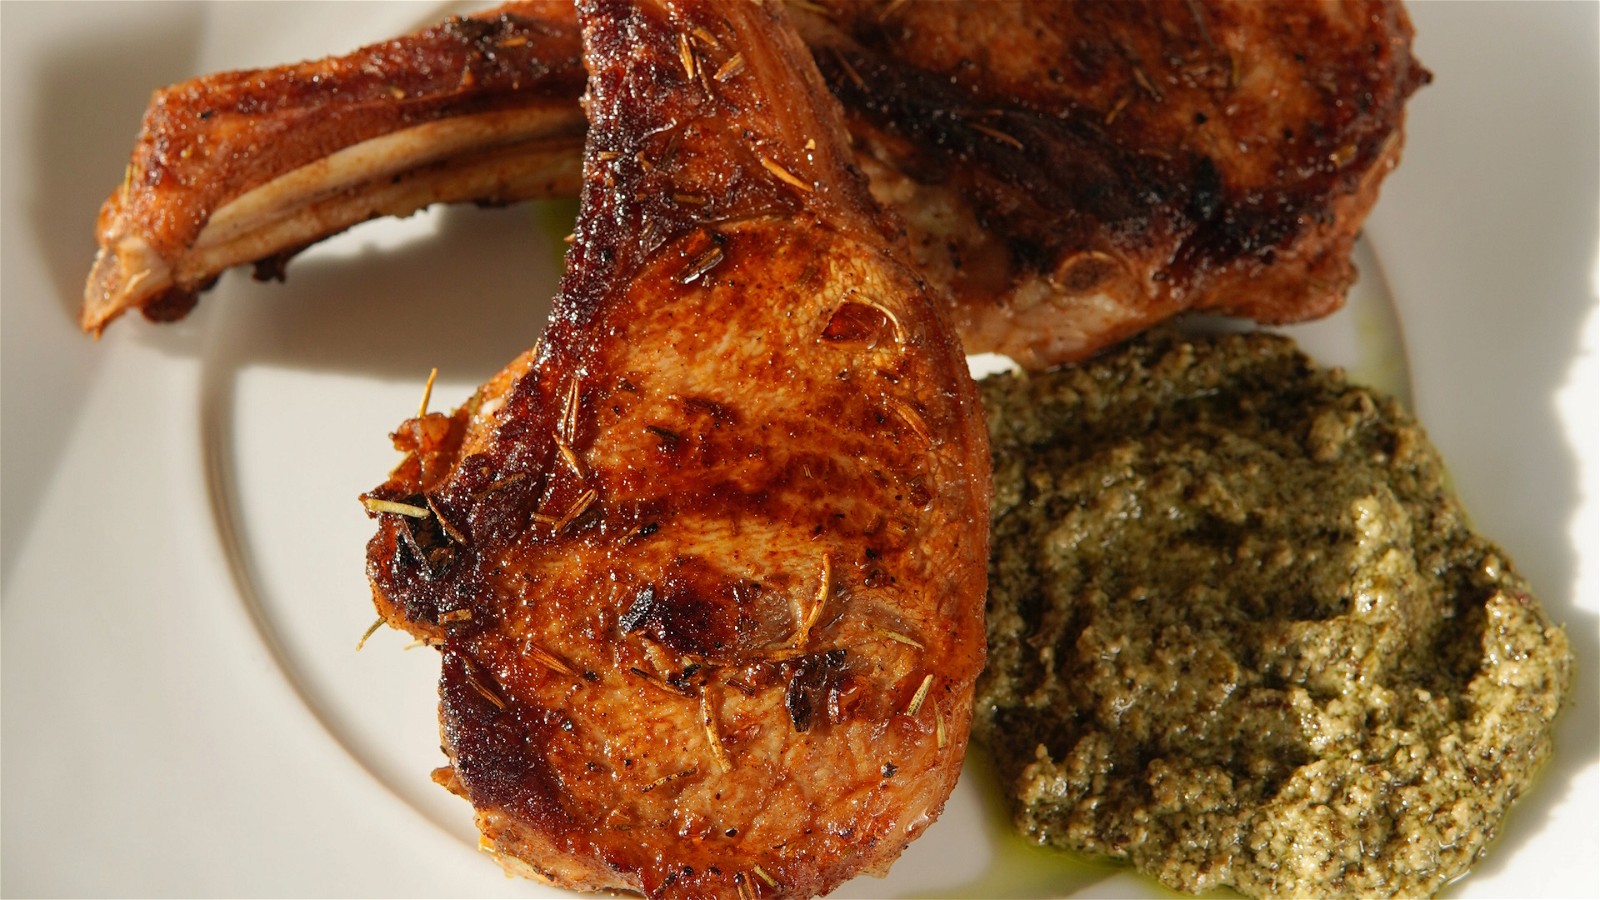 Image of Lemon and Herb Grilled Chicken